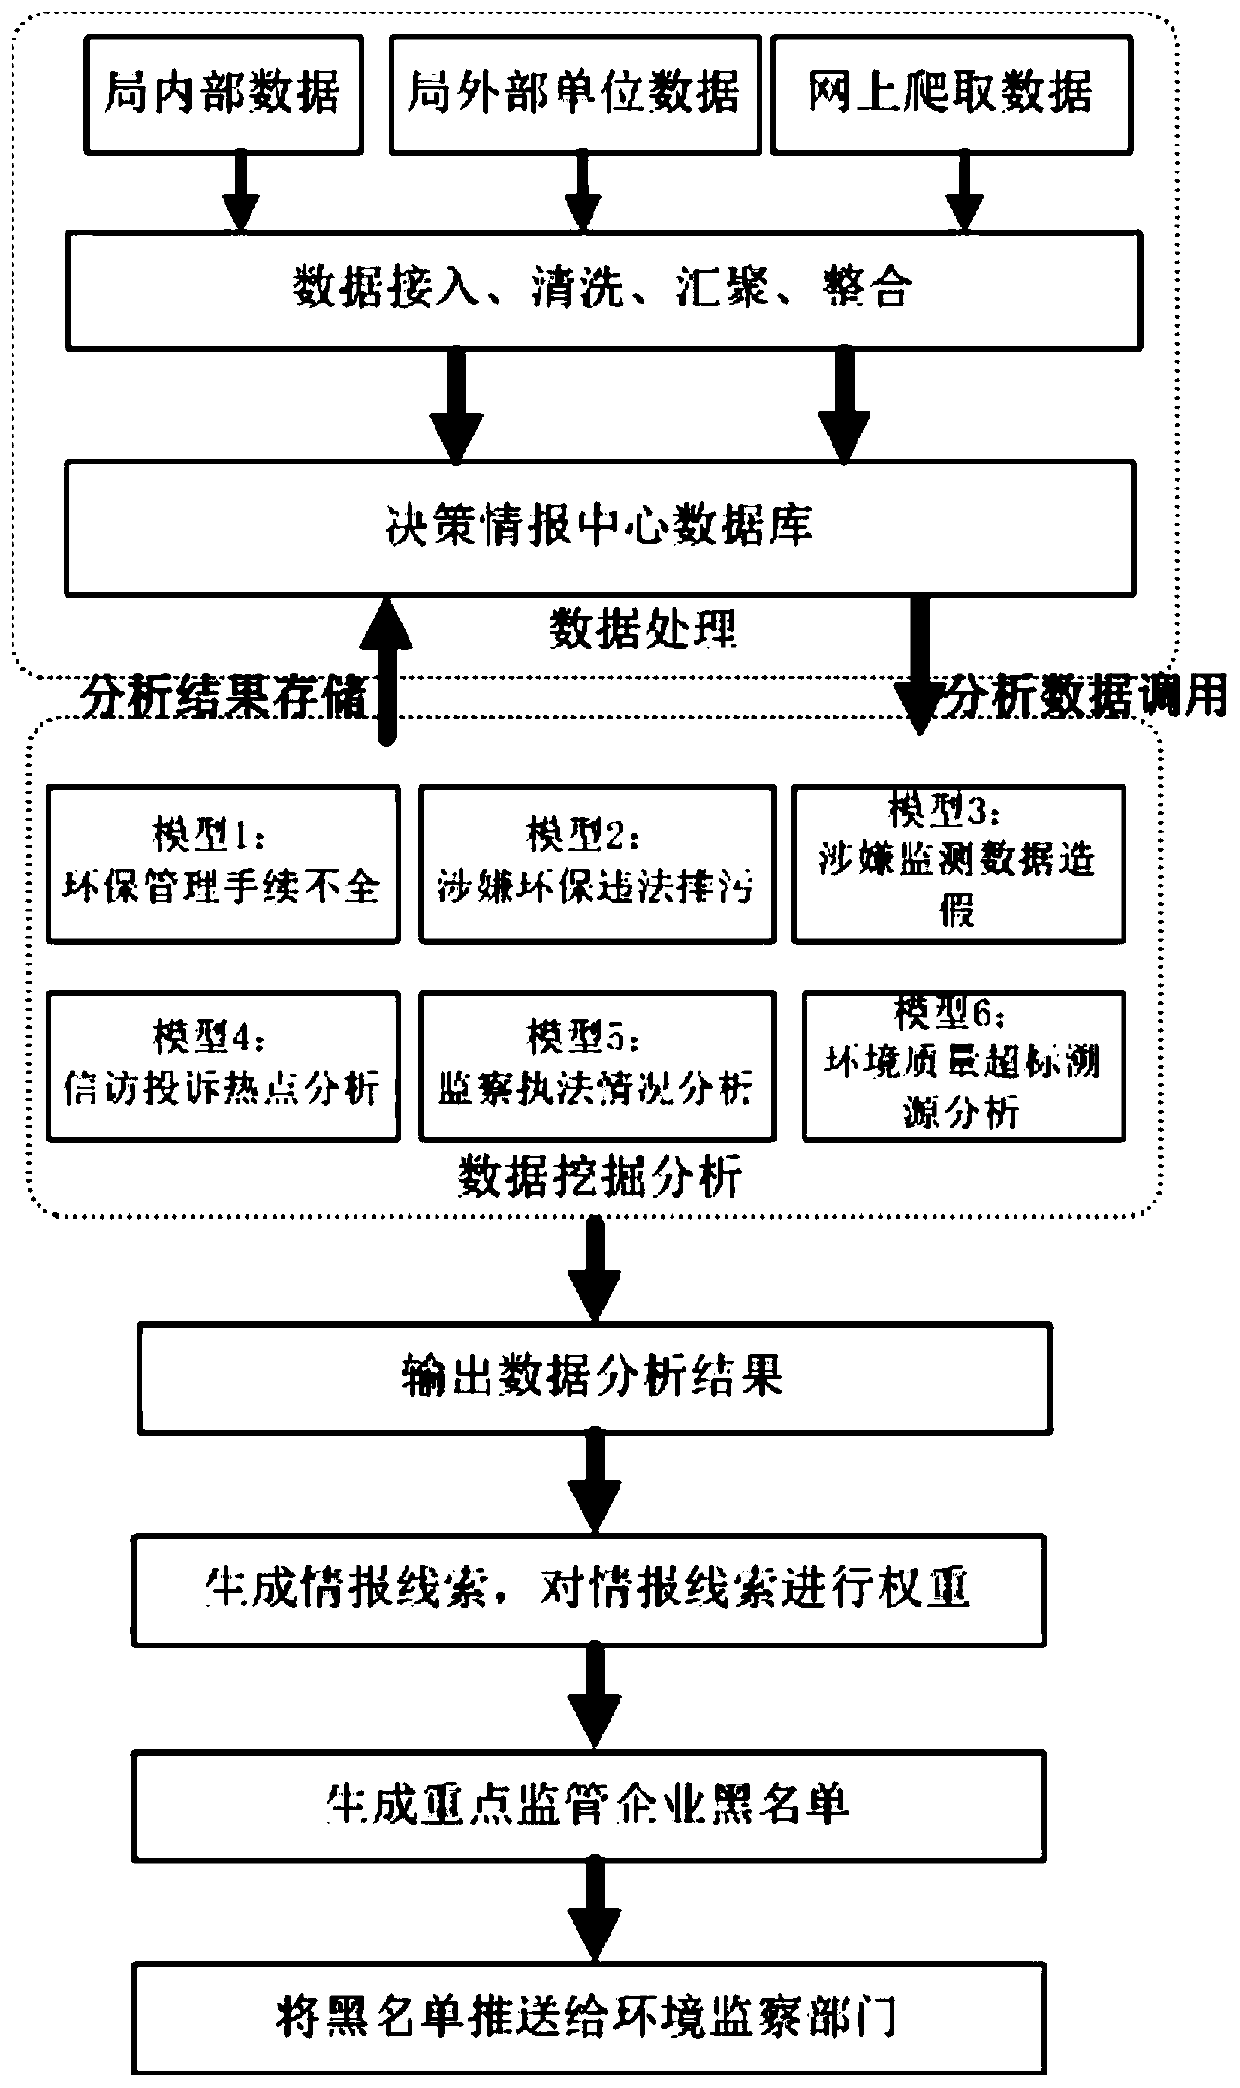 Big data application method and system for environmental supervision law enforcement decision